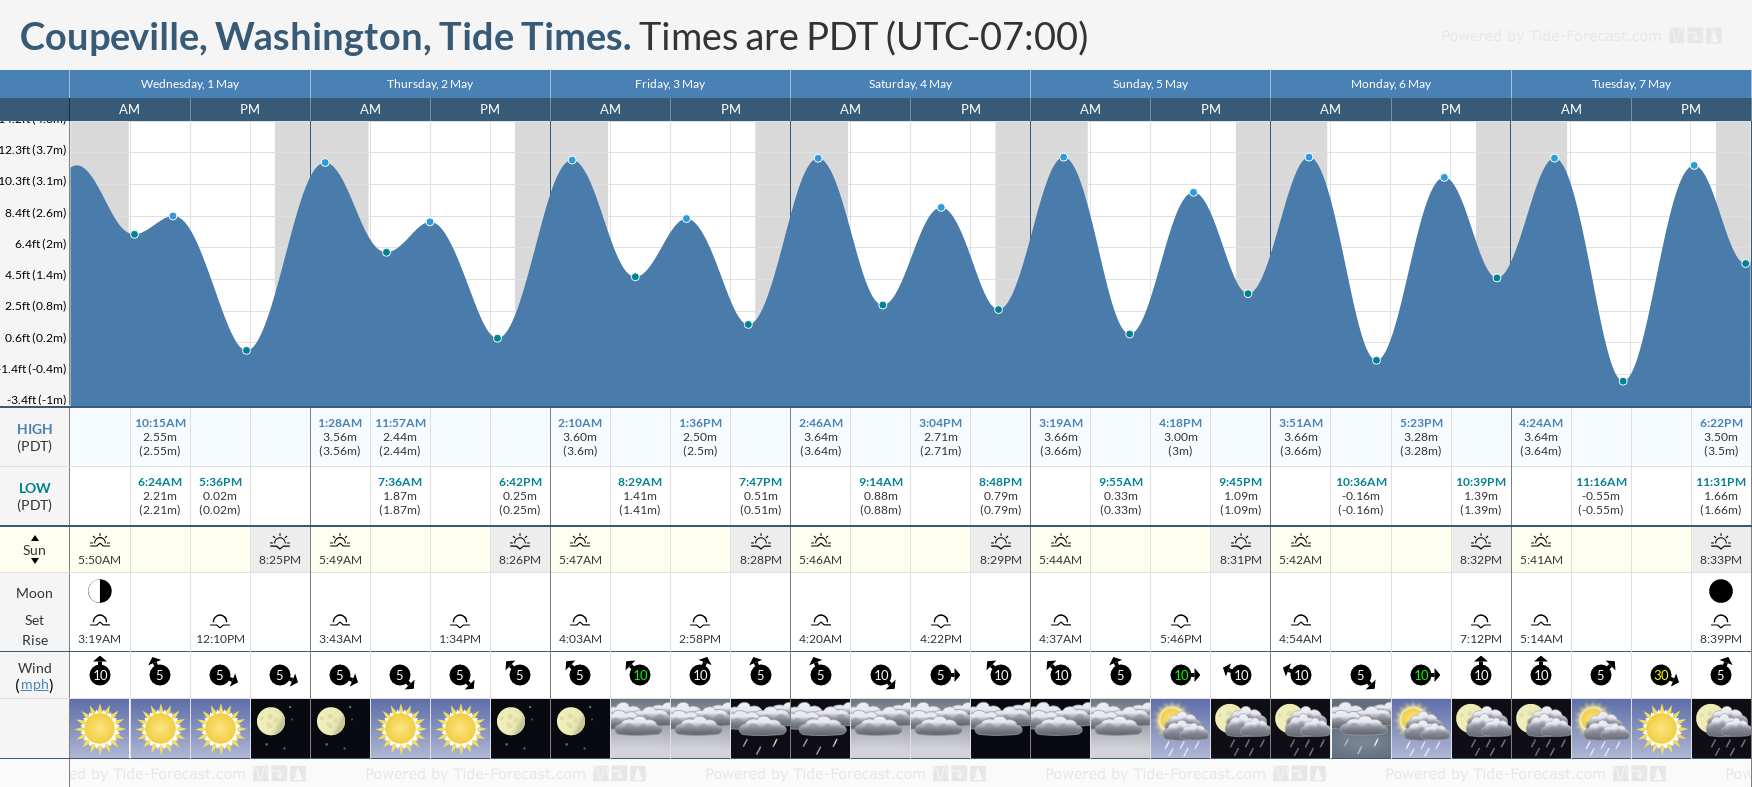 Coupeville, Washington Tide Chart including high and low tide tide times for the next 7 days